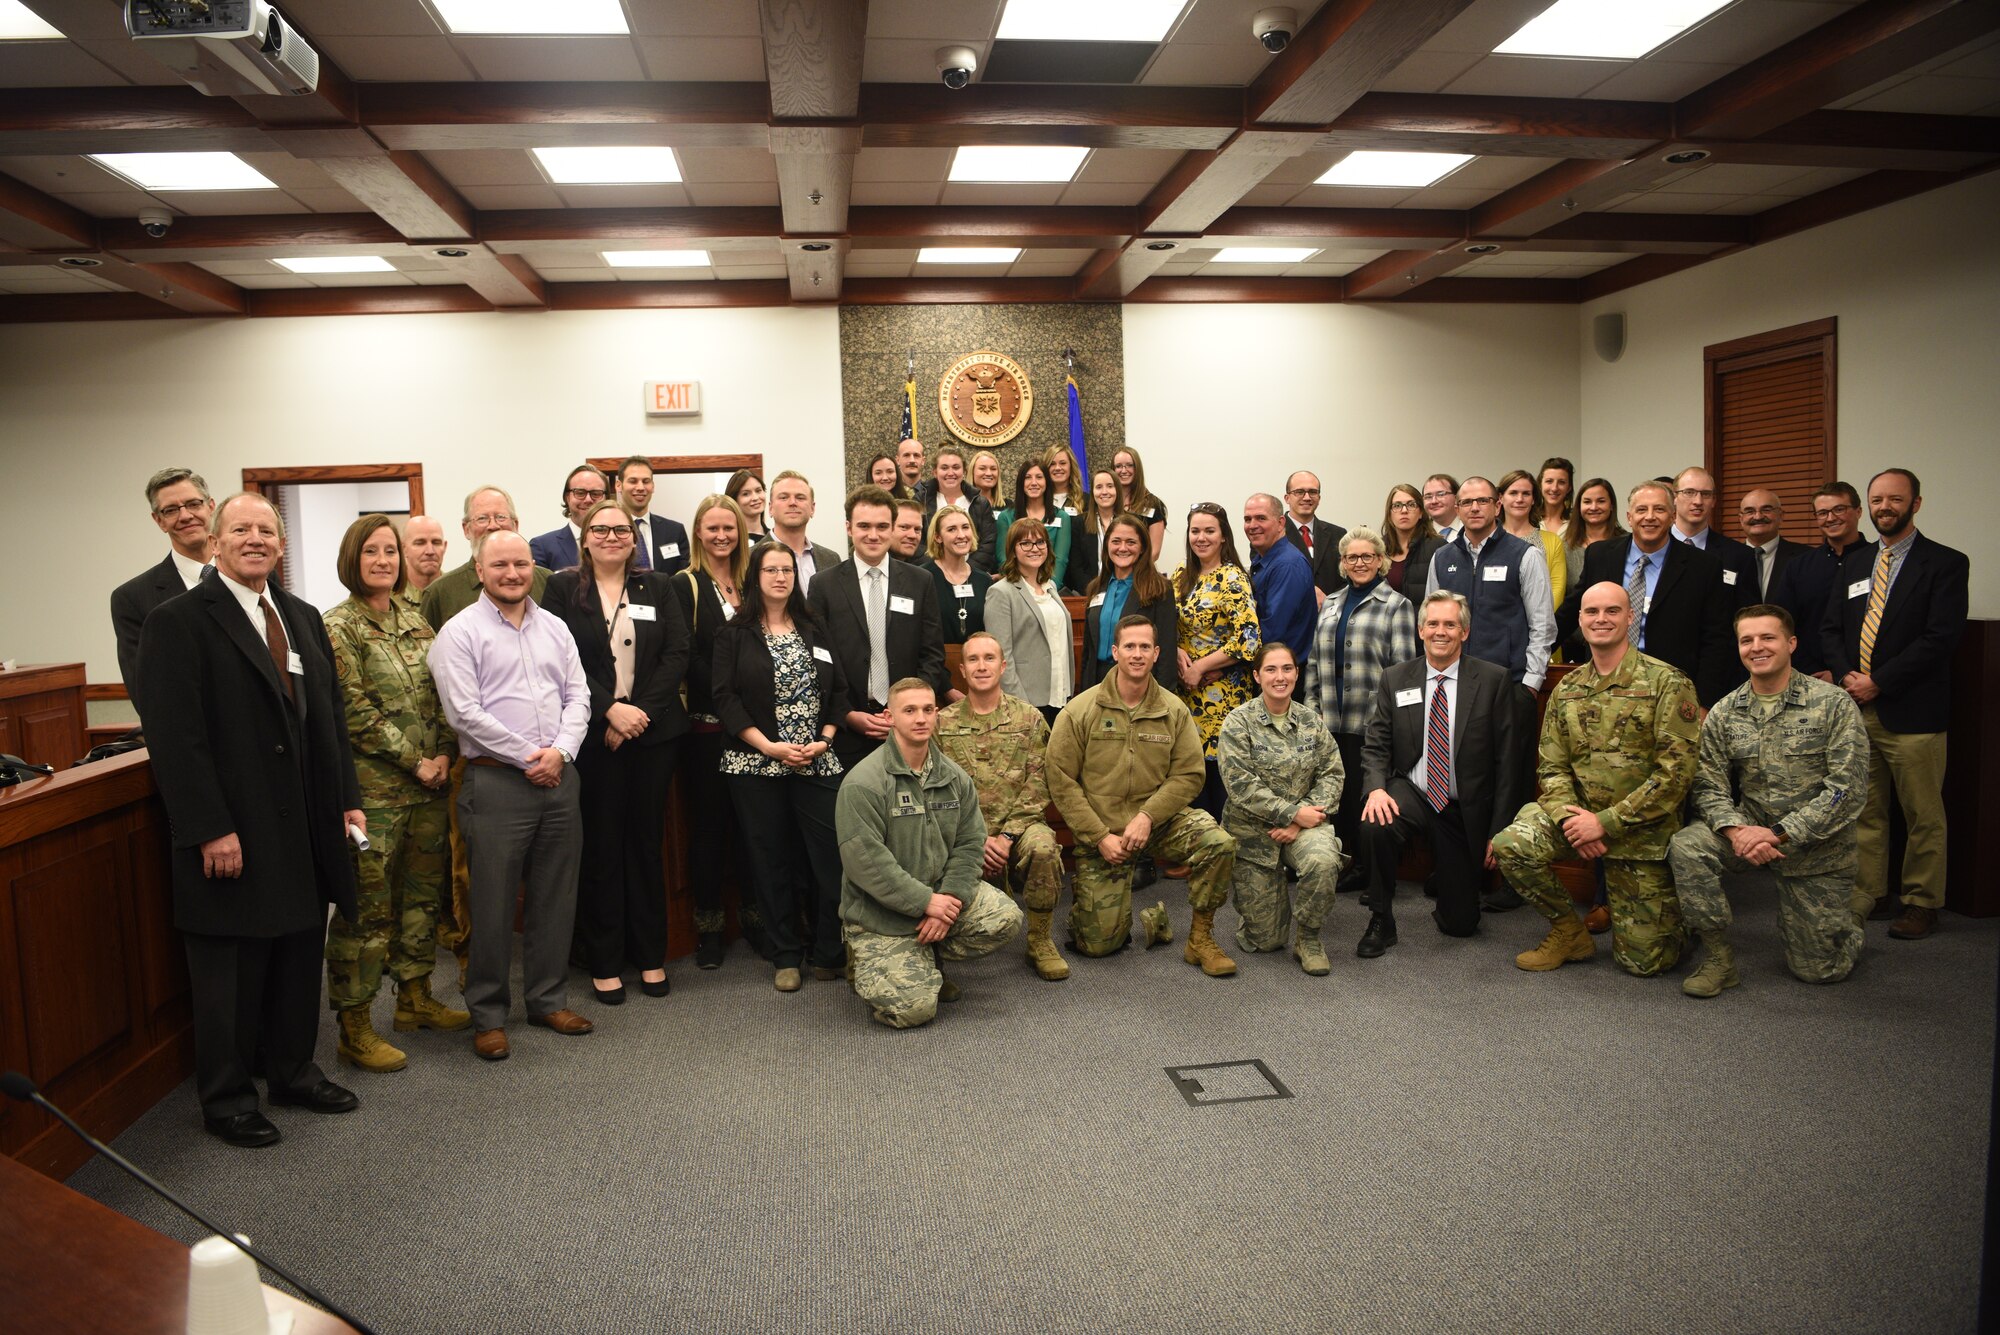 A visiting group from the local chapter of the American Inns of Court poses with members of the 90th Missile Wing's judge advocates during a tour on base Nov. 7, 2019, on F. E. Warren Air Force Base, Wyo. Members of the Inns of Court included justices from the state supreme court, law professors from the University of Wyoming, and local attorneys. The tour was intended to promote stronger relationships between the base legal professionals and their local civilian counterparts. (U.S. Air Force photo by Glenn S. Robertson).